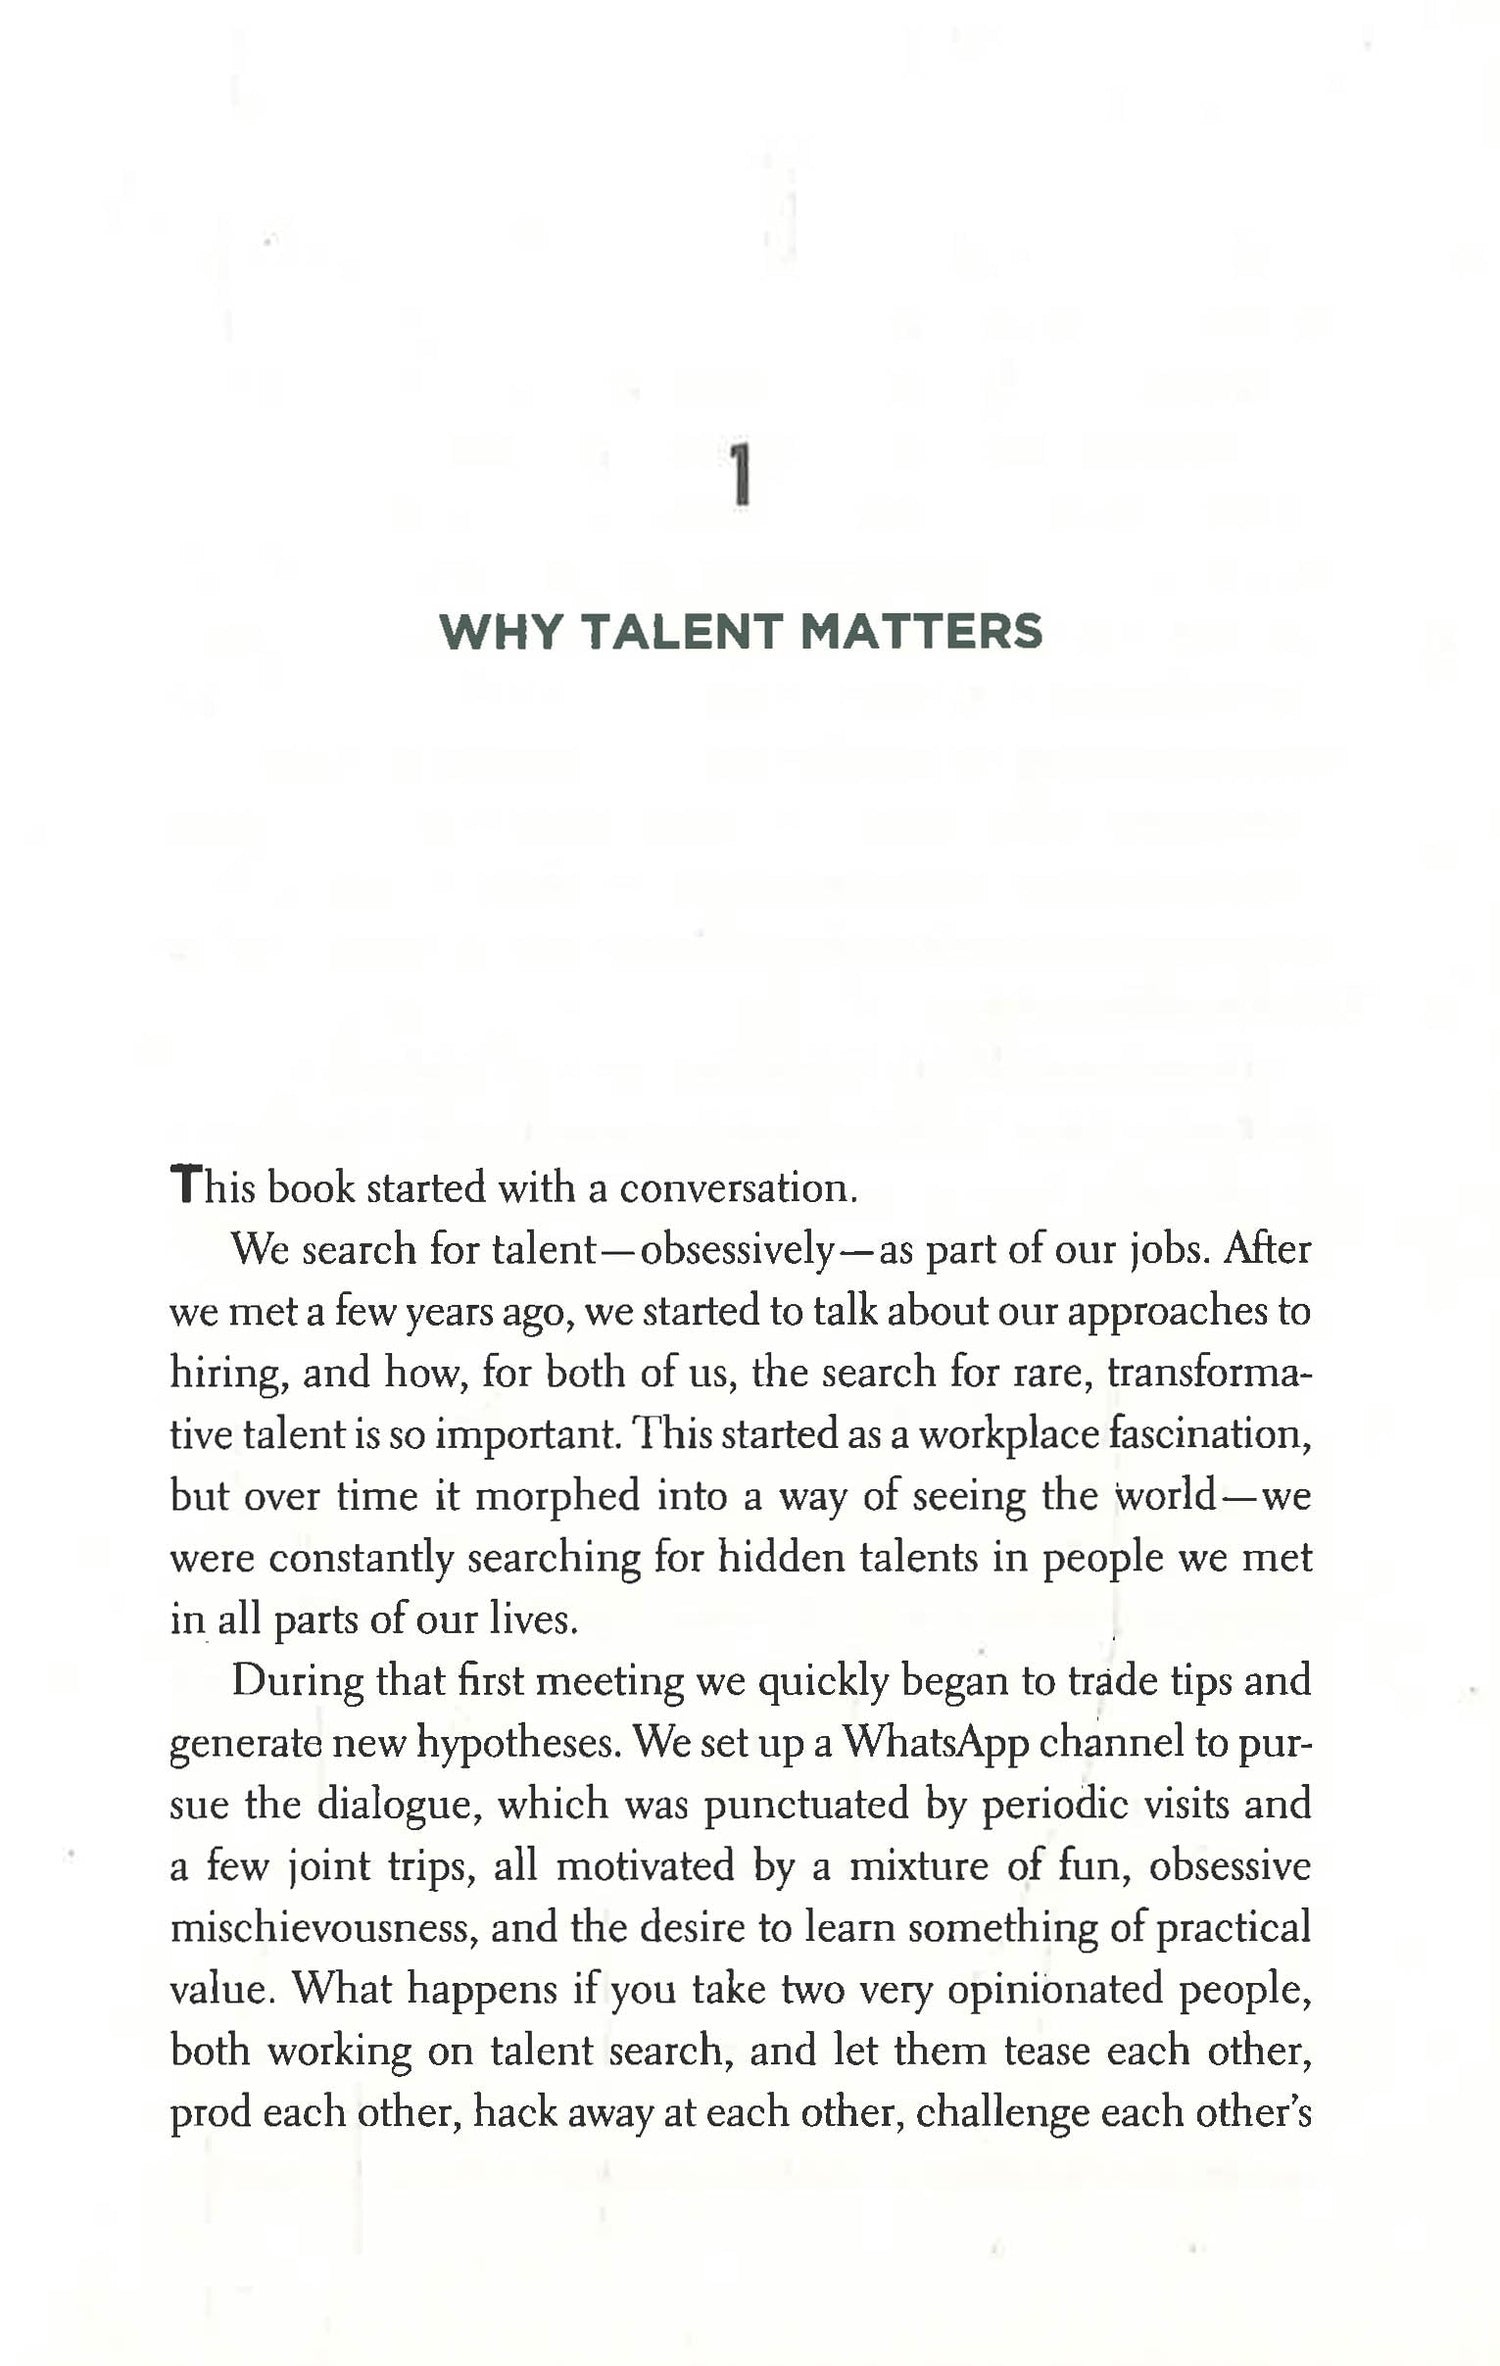 Talent: How to Identify Energizers, Creatives, and Winners Around the  World: Cowen, Tyler, Gross, Daniel: 9781250275813: : Books